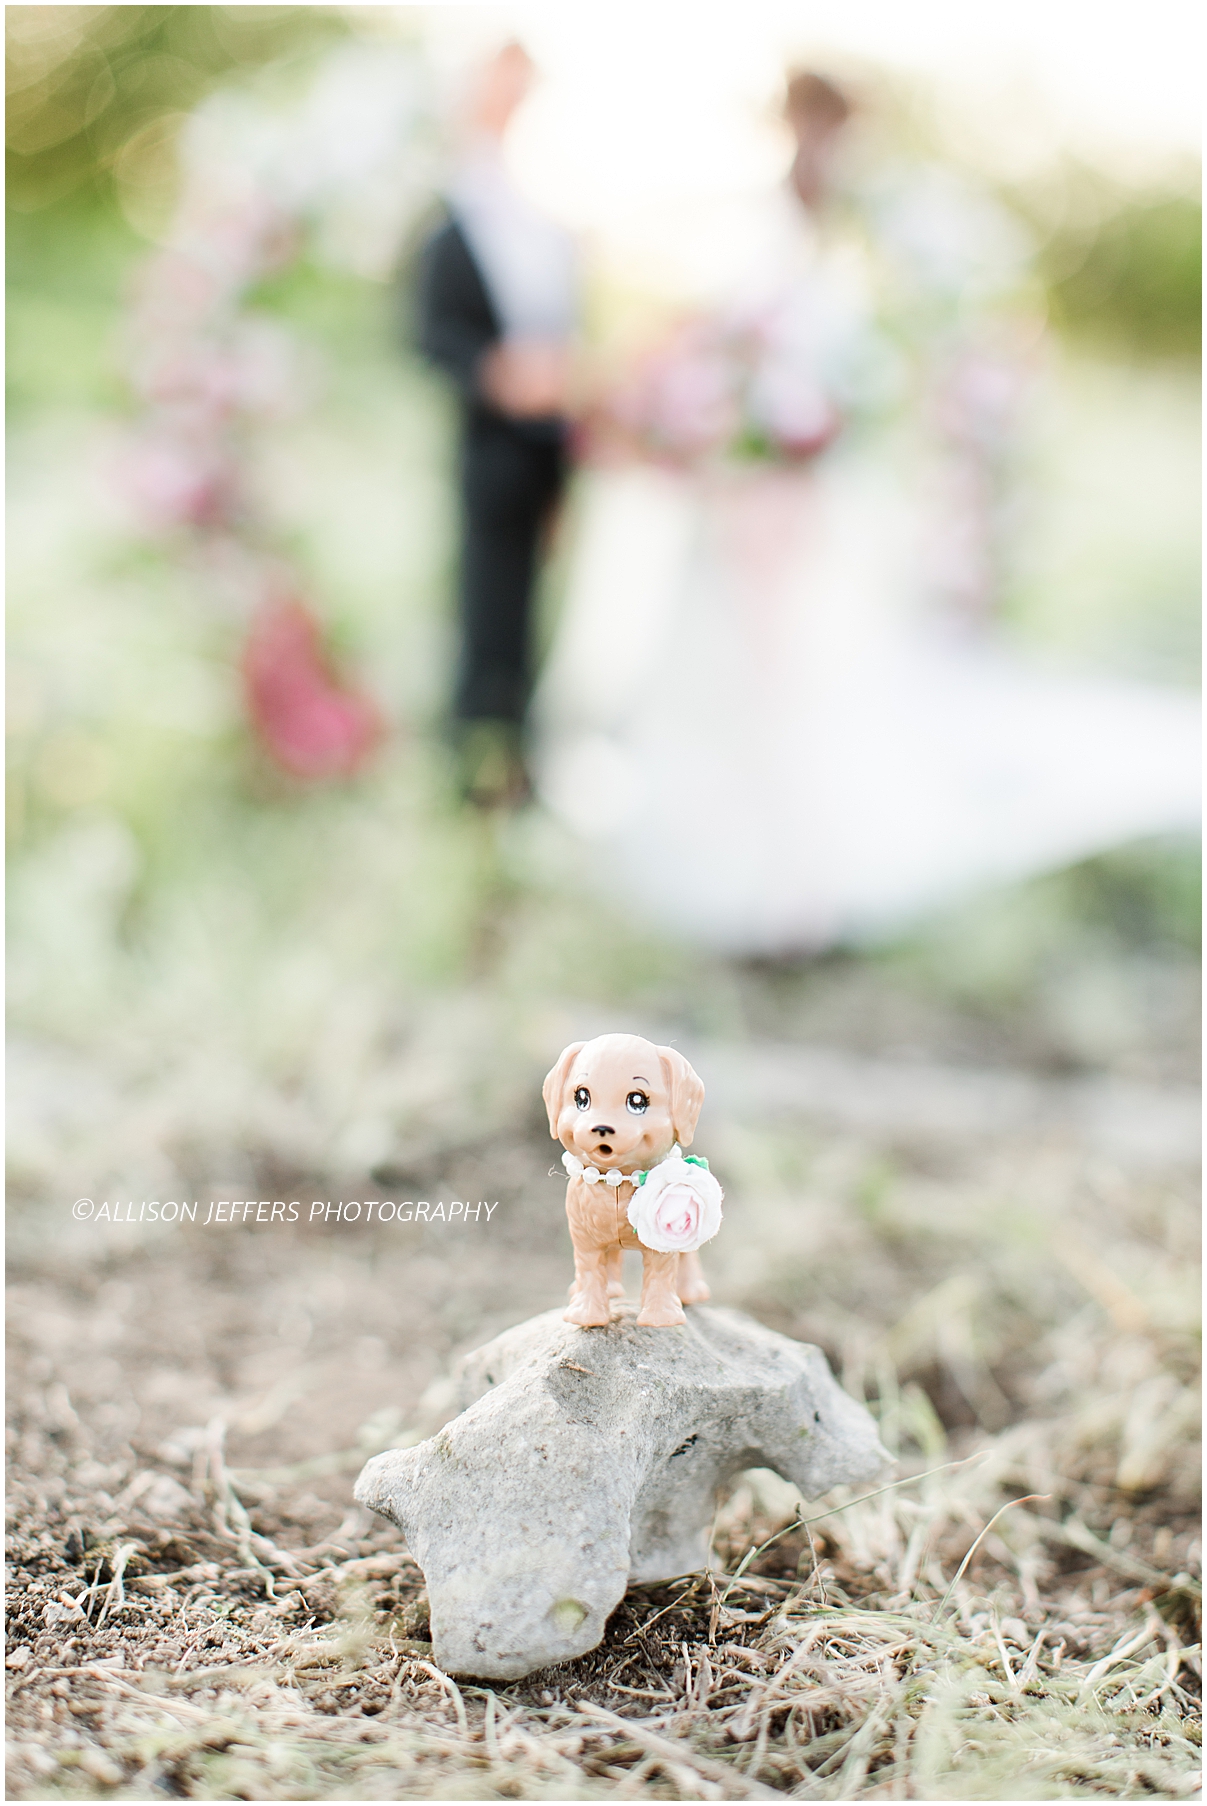 Barbie and Ken dream wedding photography styled shoot by Allison Jeffers Photography 0068